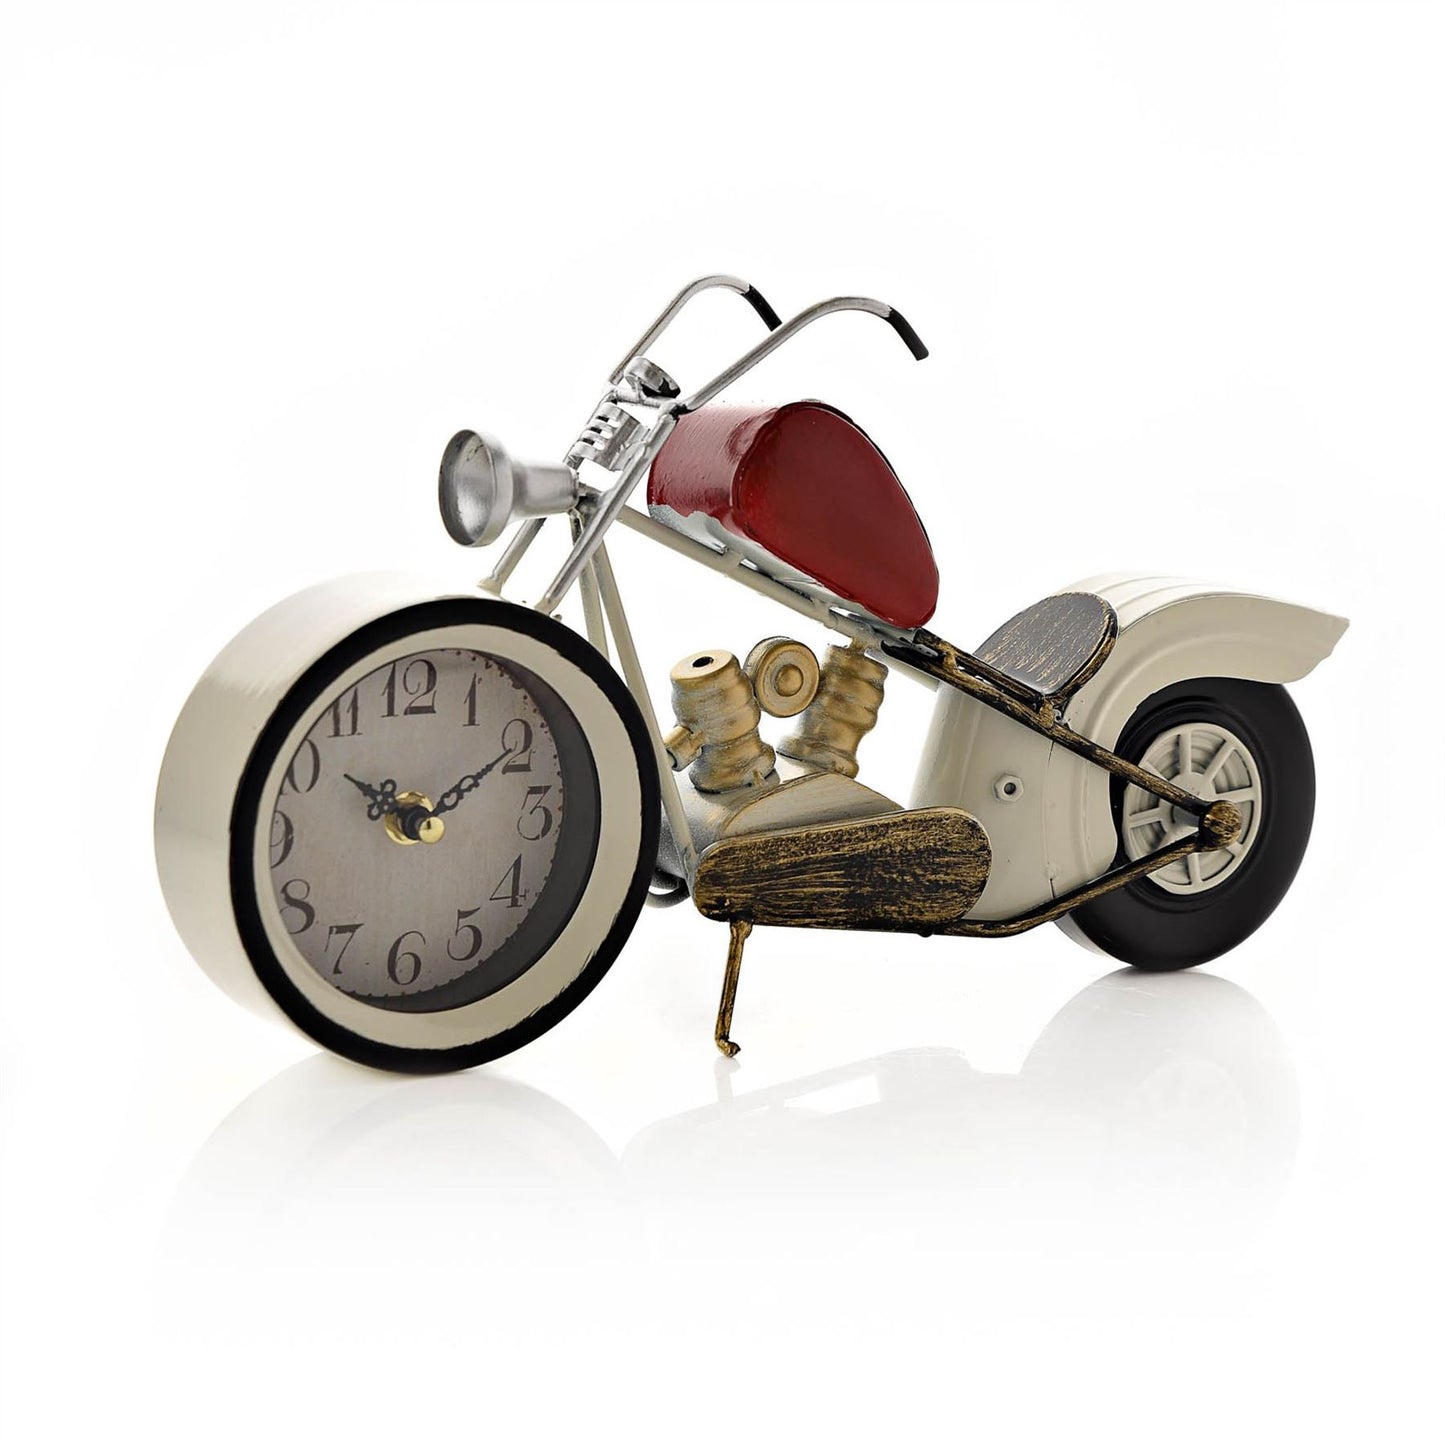 Hometime Mantel Clock - Red & White Motorcycle